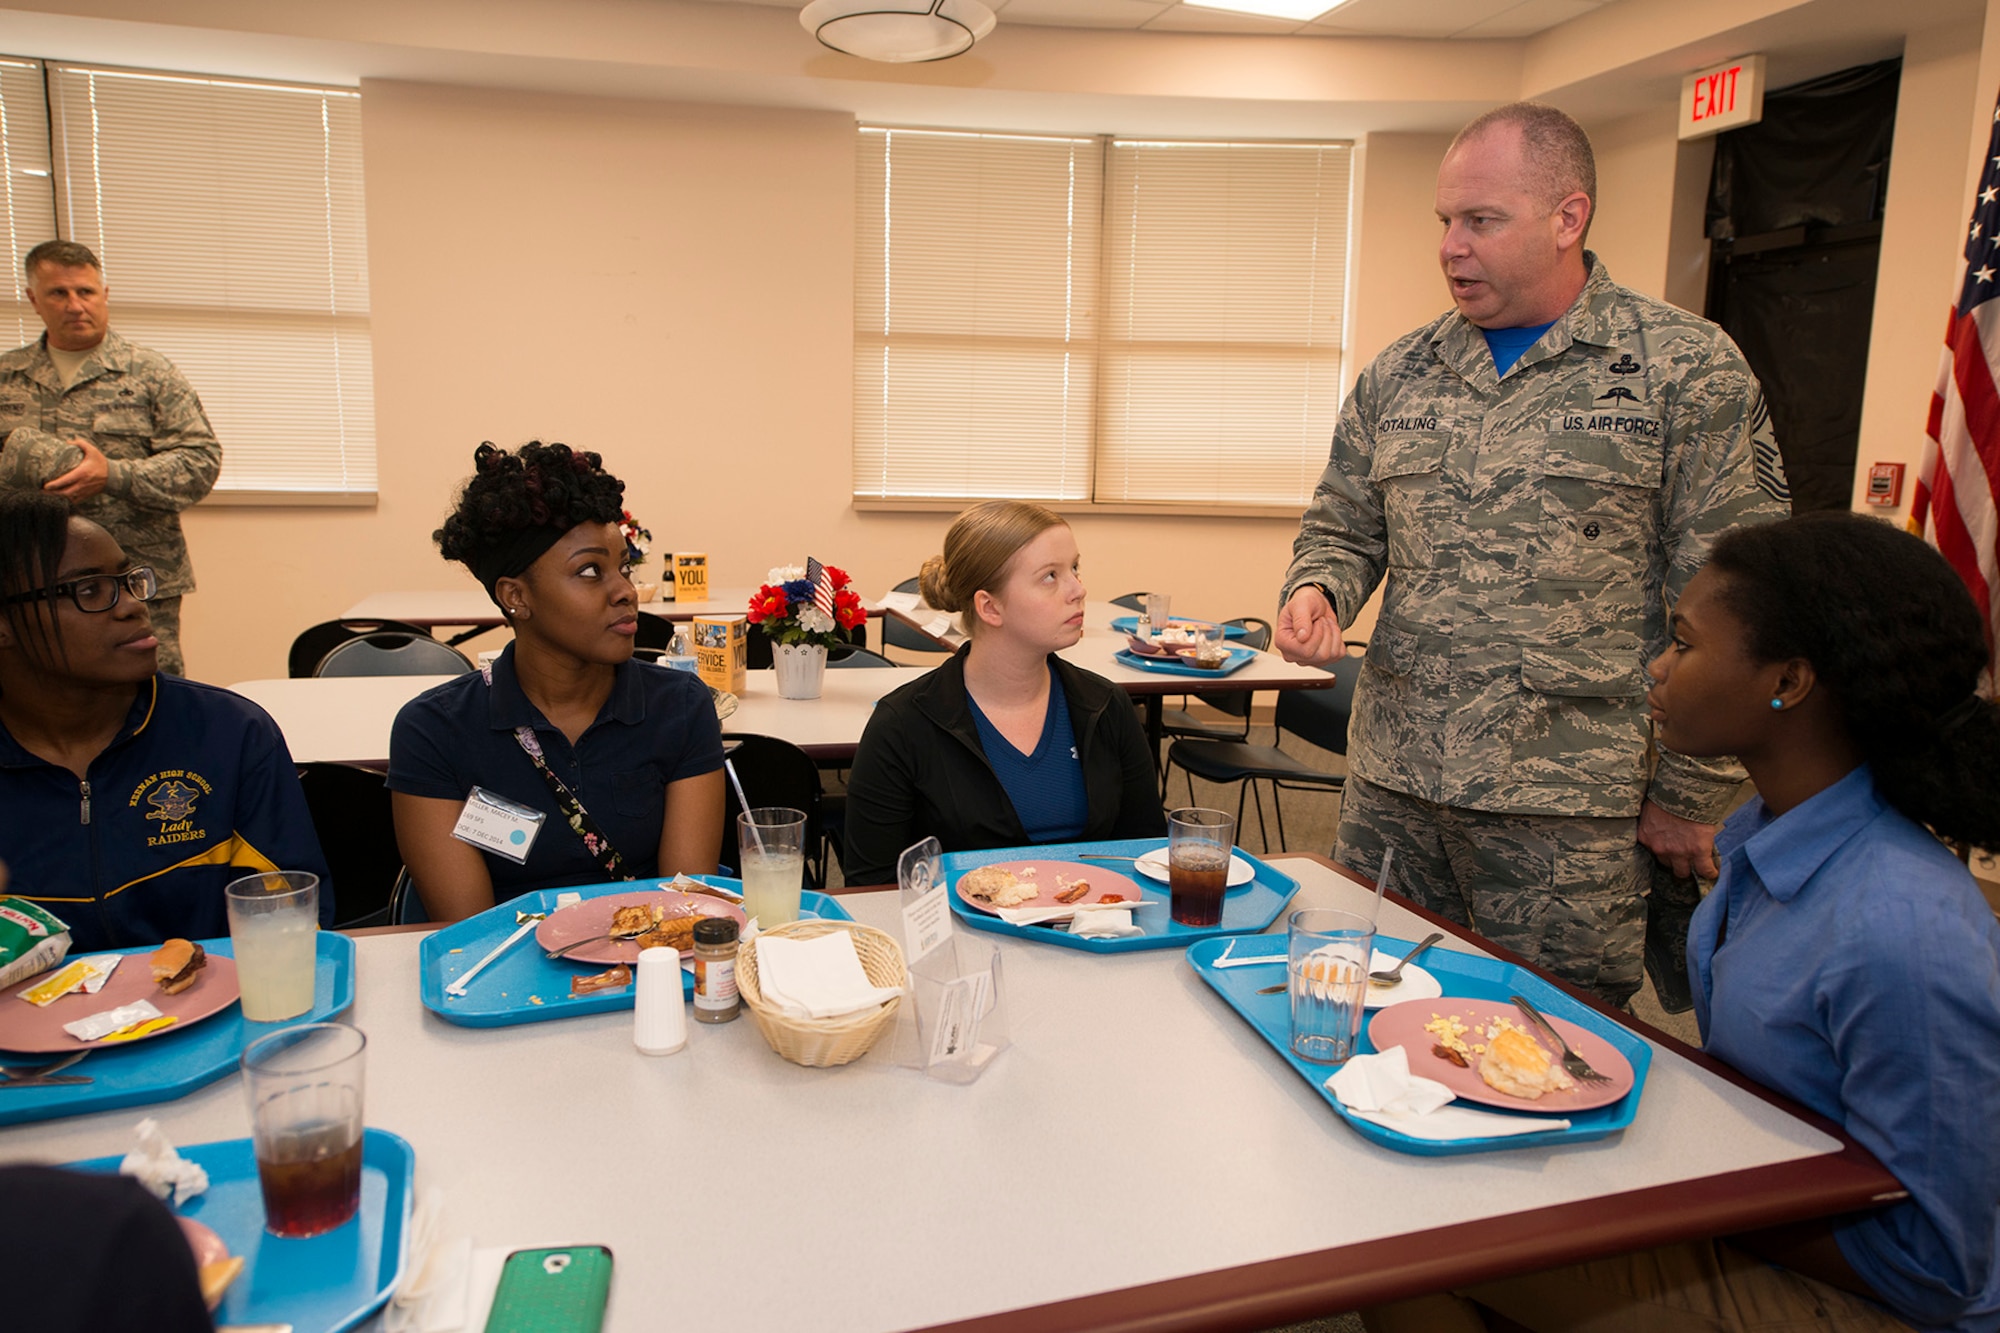 U.S. Air Force Chief Master Sgt. James W. Hotaling, Command Chief Master Sgt. for the Air National Guard, speaks to new enlistees while visiting the South Carolina Air National Guard's 169th Fighter Wing at McEntire Joint National Guard Base, S.C., April 11, 2015. Hotaling hosted town hall meetings to engage Swamp Fox Airmen in the discussion of three key points; the profession of arms, the health of the force and recognizing and renewing commitments to Airmen.  (U.S. Air National Guard photo by Tech. Sgt. Jorge Intriago/RELEASED)